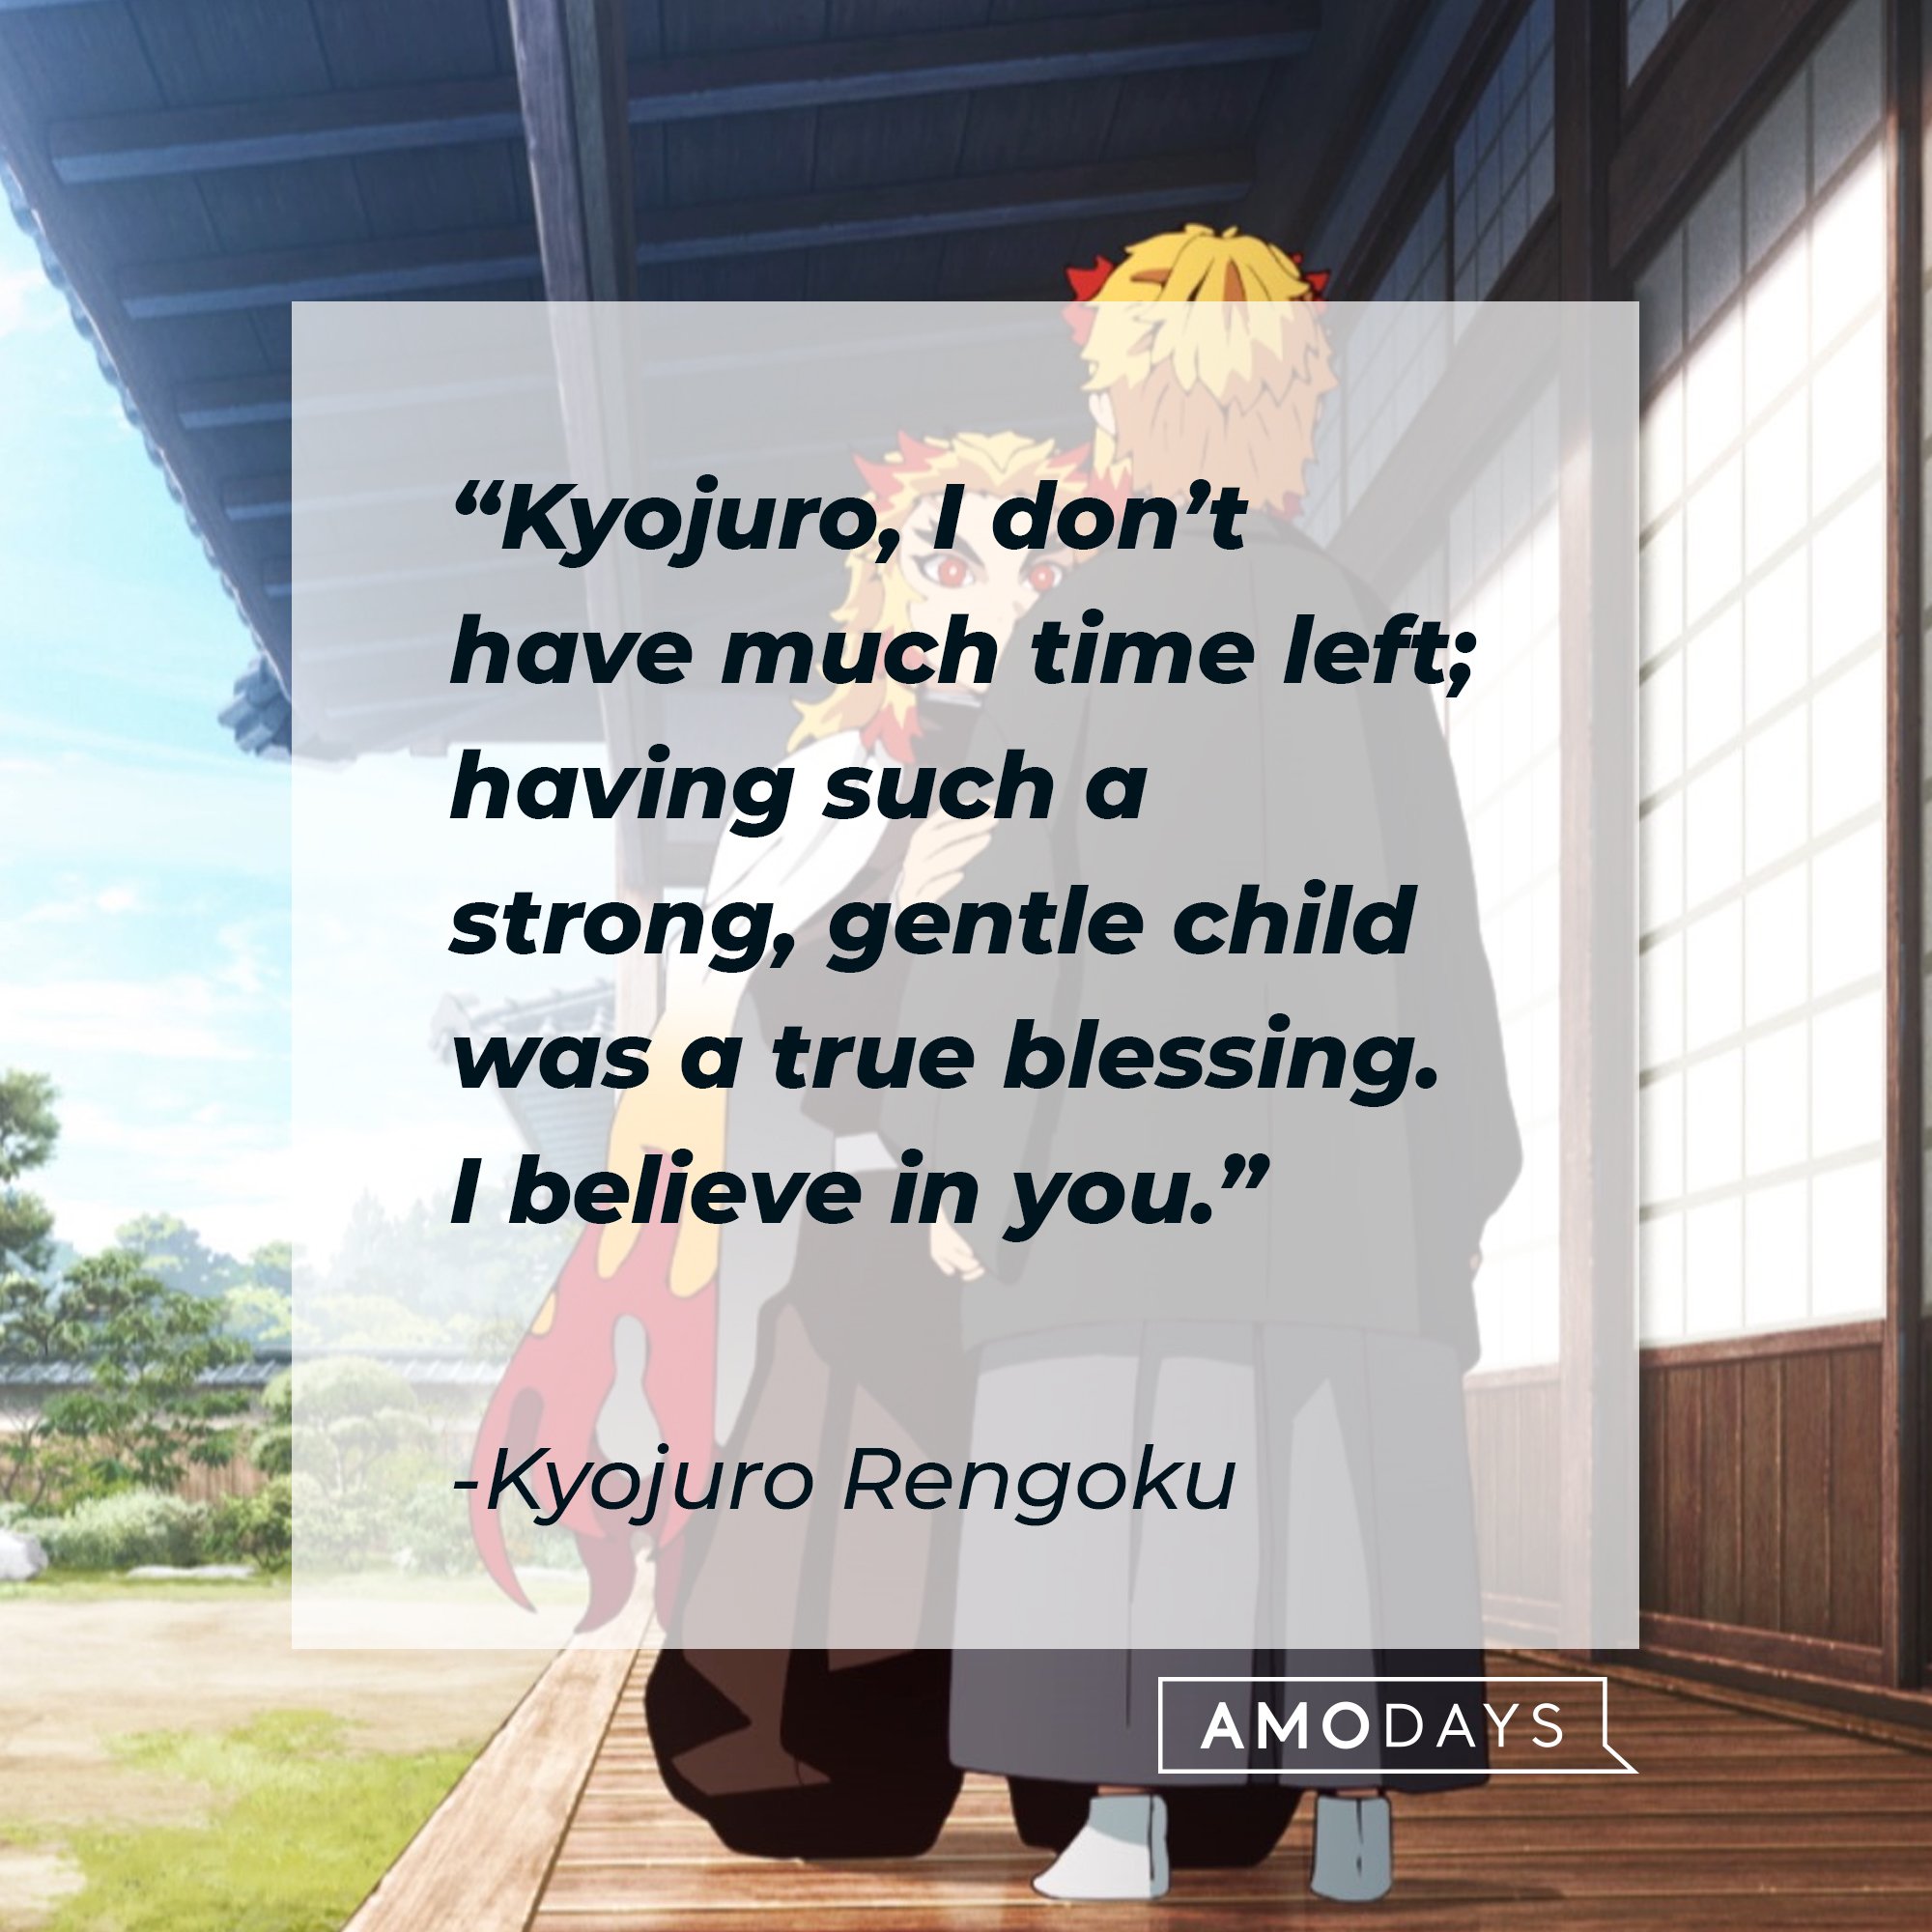 Kyojuro Rengoku’s quote: “Kyojuro, I don’t have much time left; having such a strong, gentle child was a true blessing. I believe in you." | Image: AmoDays